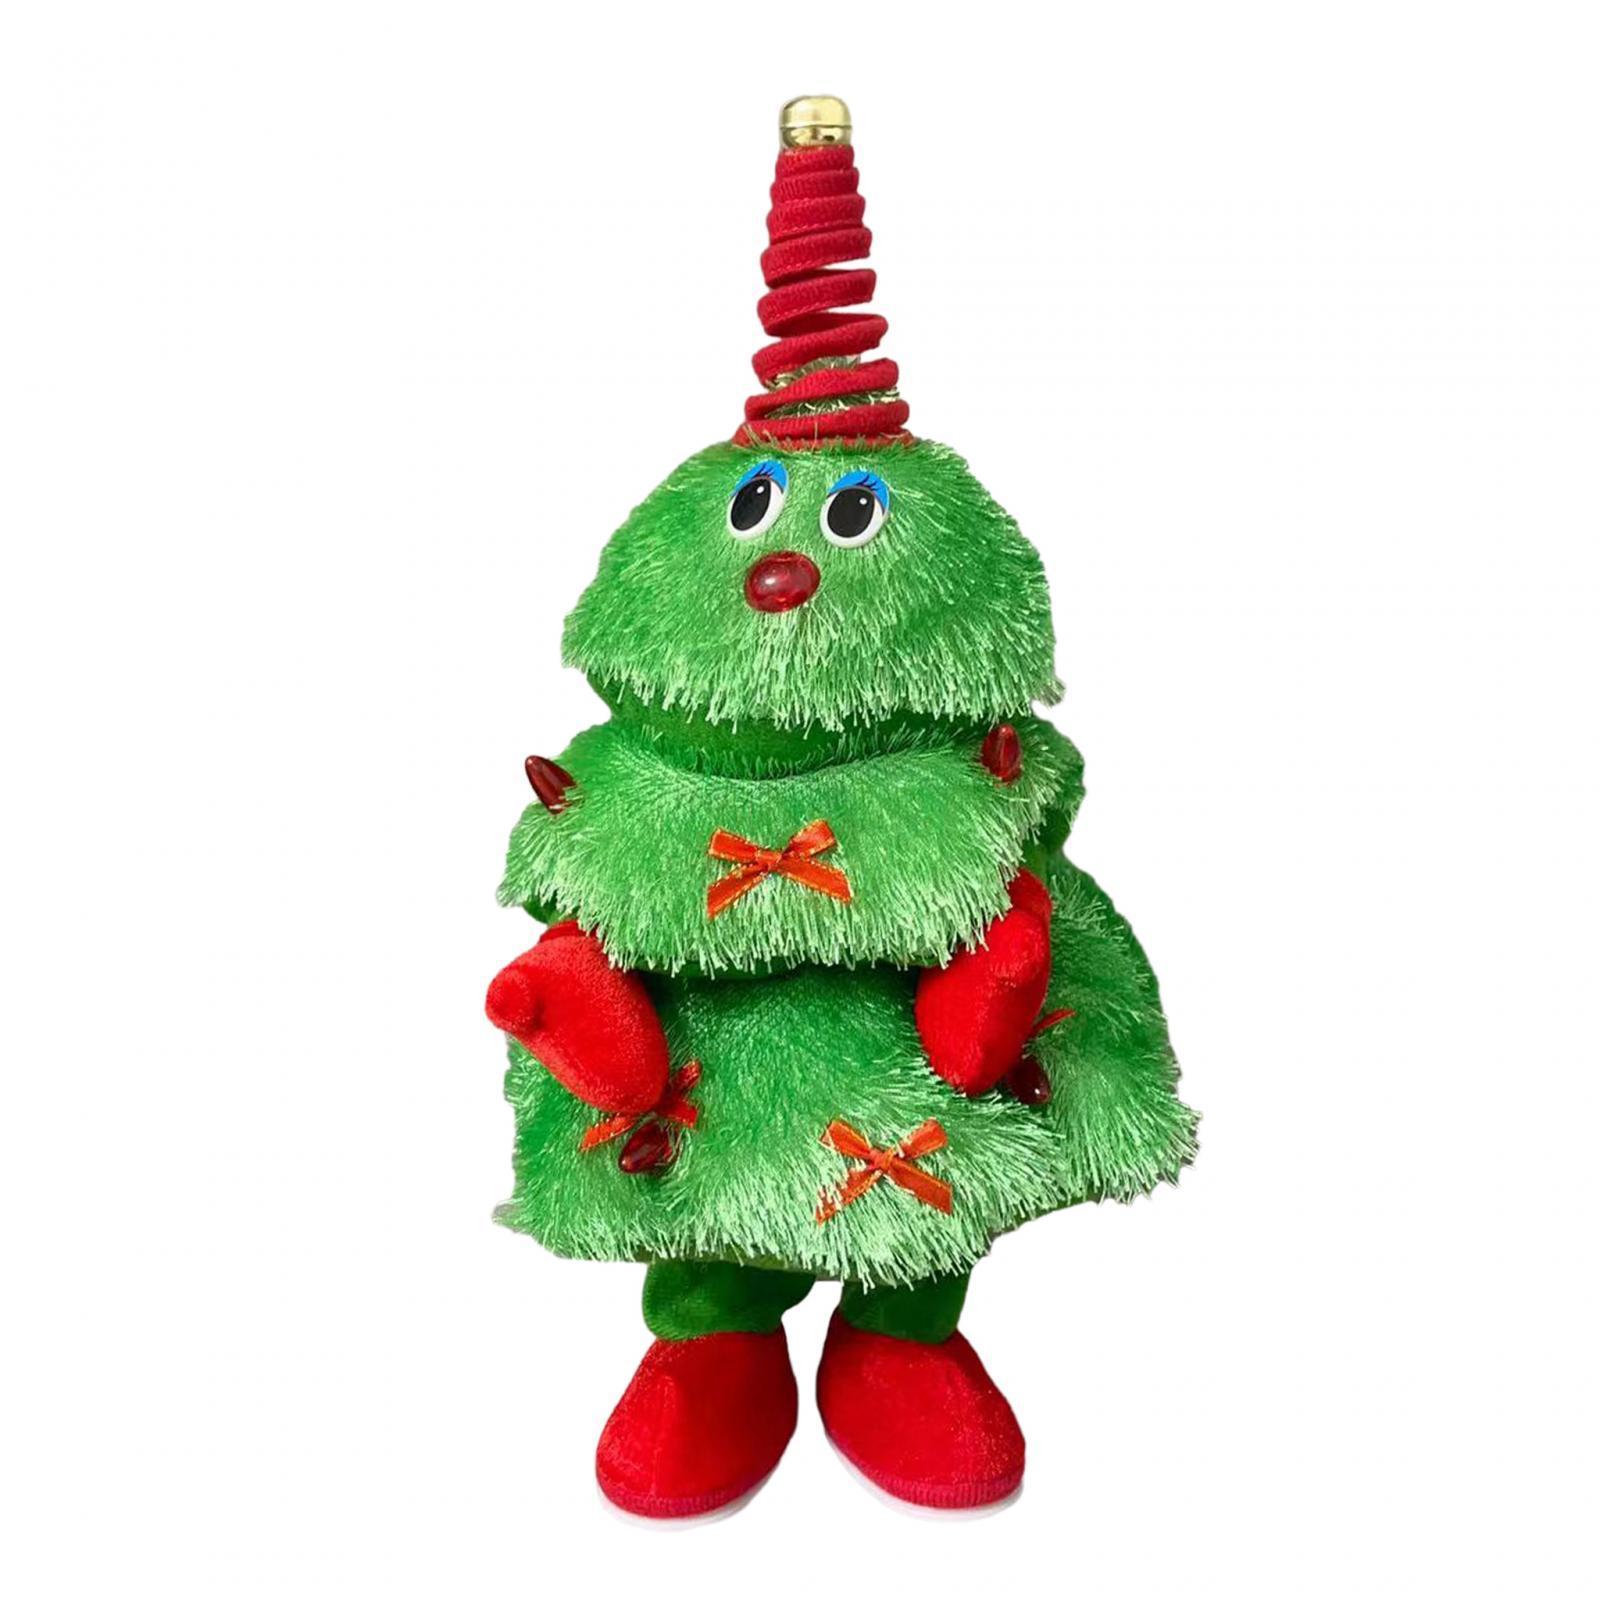 Christmas Electric Plush Dancing Plush Toy for Living Room Party Decorations